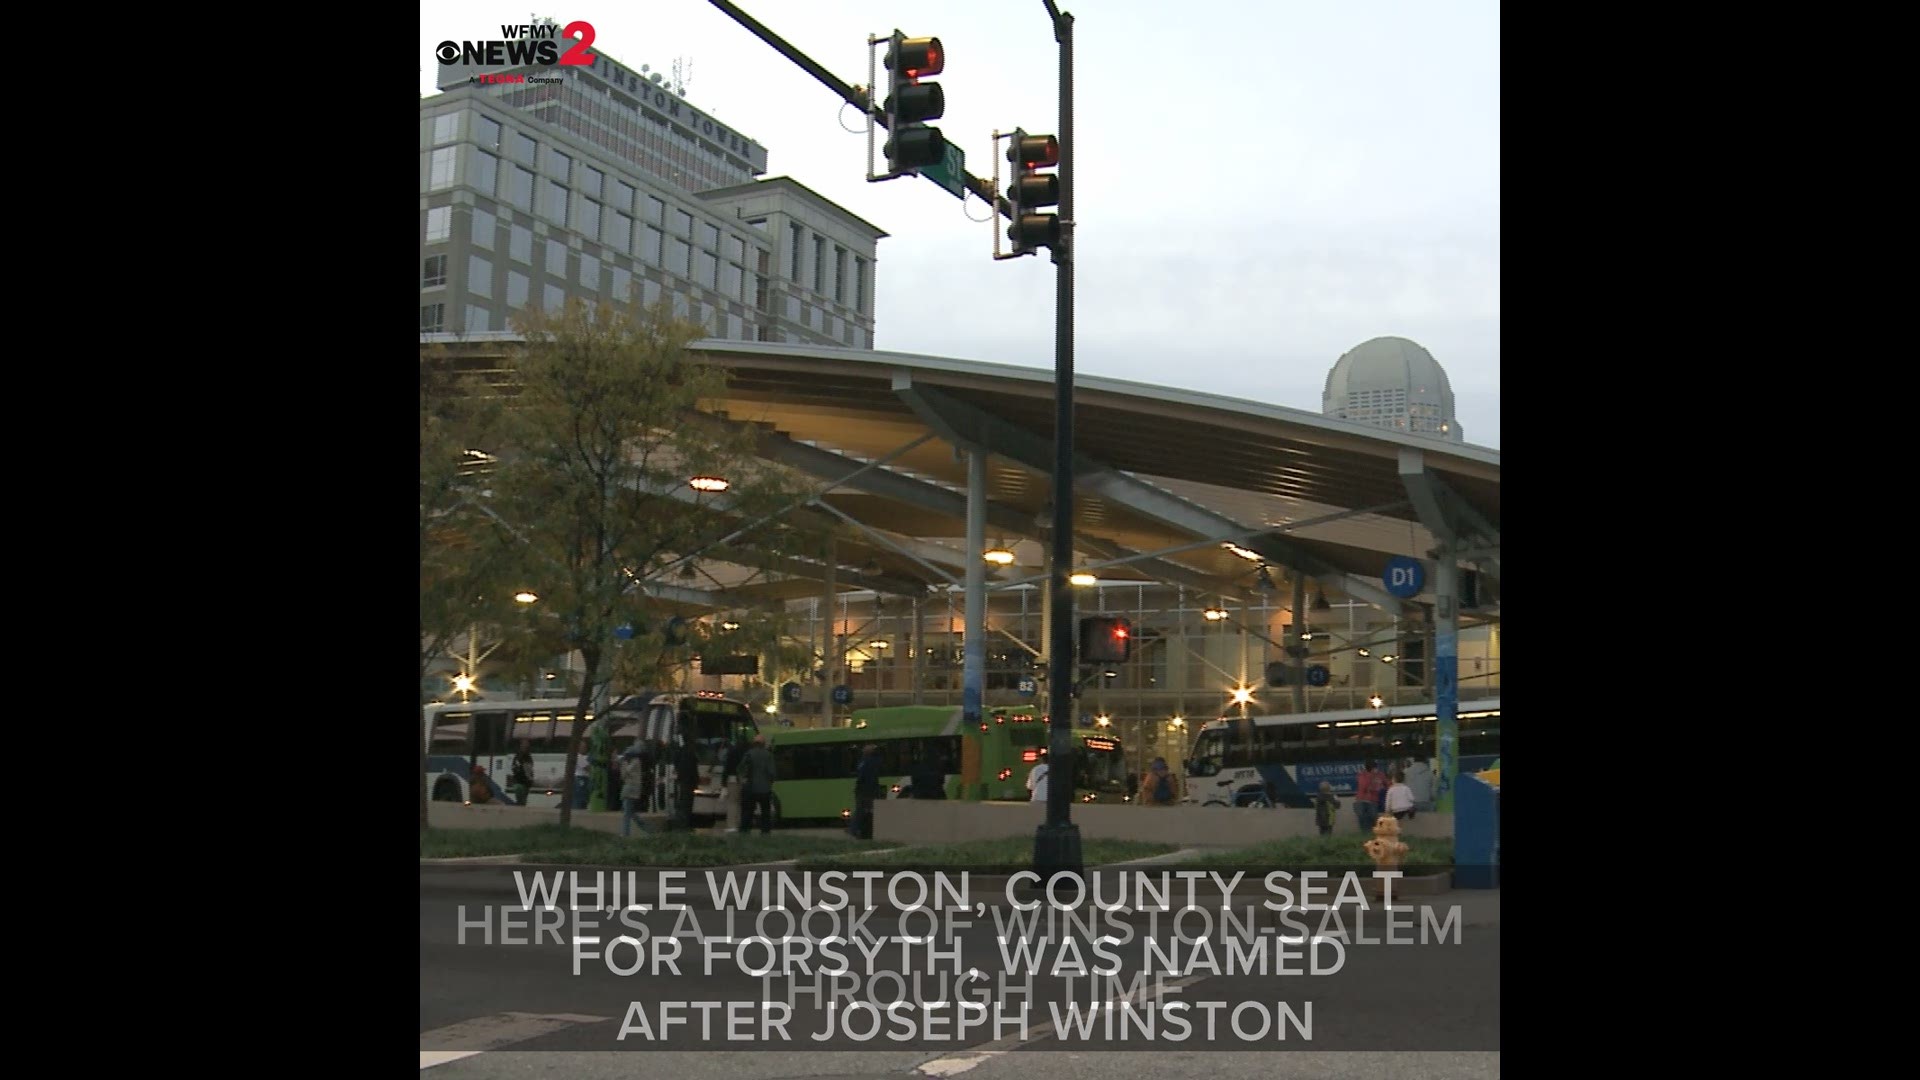 Winston-Salem was formed on May 13, 1913 when the town of Salem and the City of Winston merged.